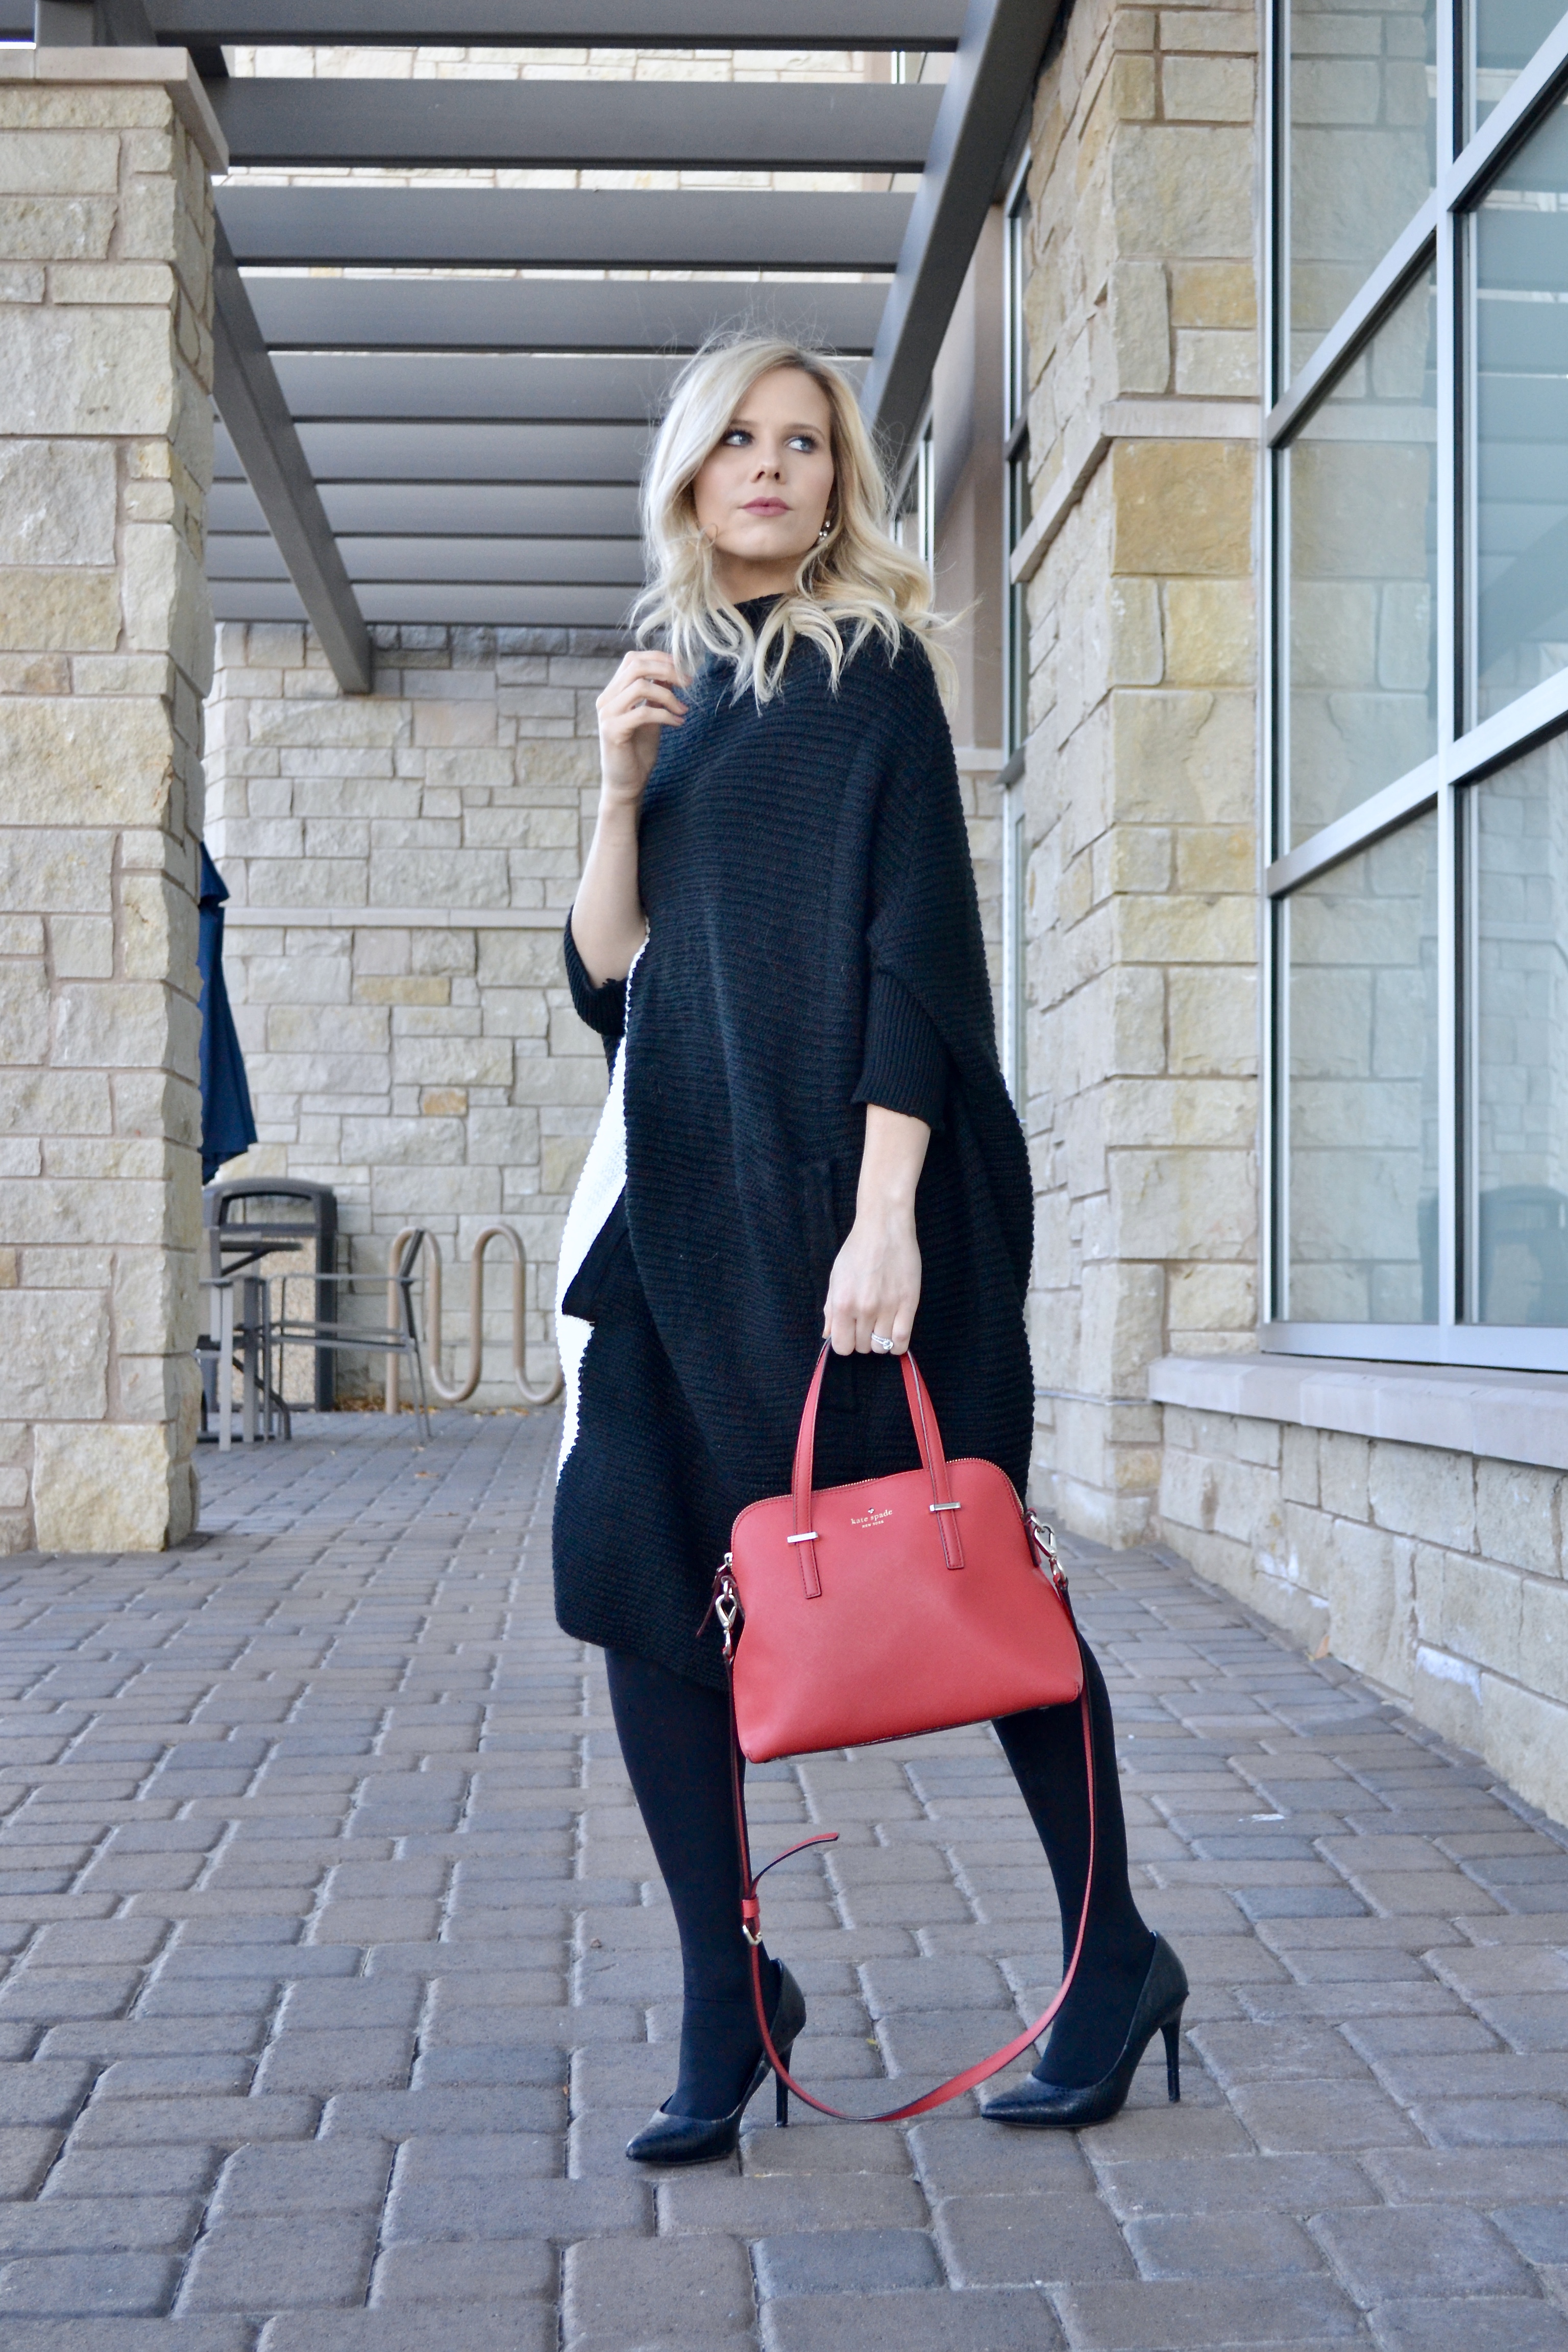 black and white color black sweater with Kate Spade red bag